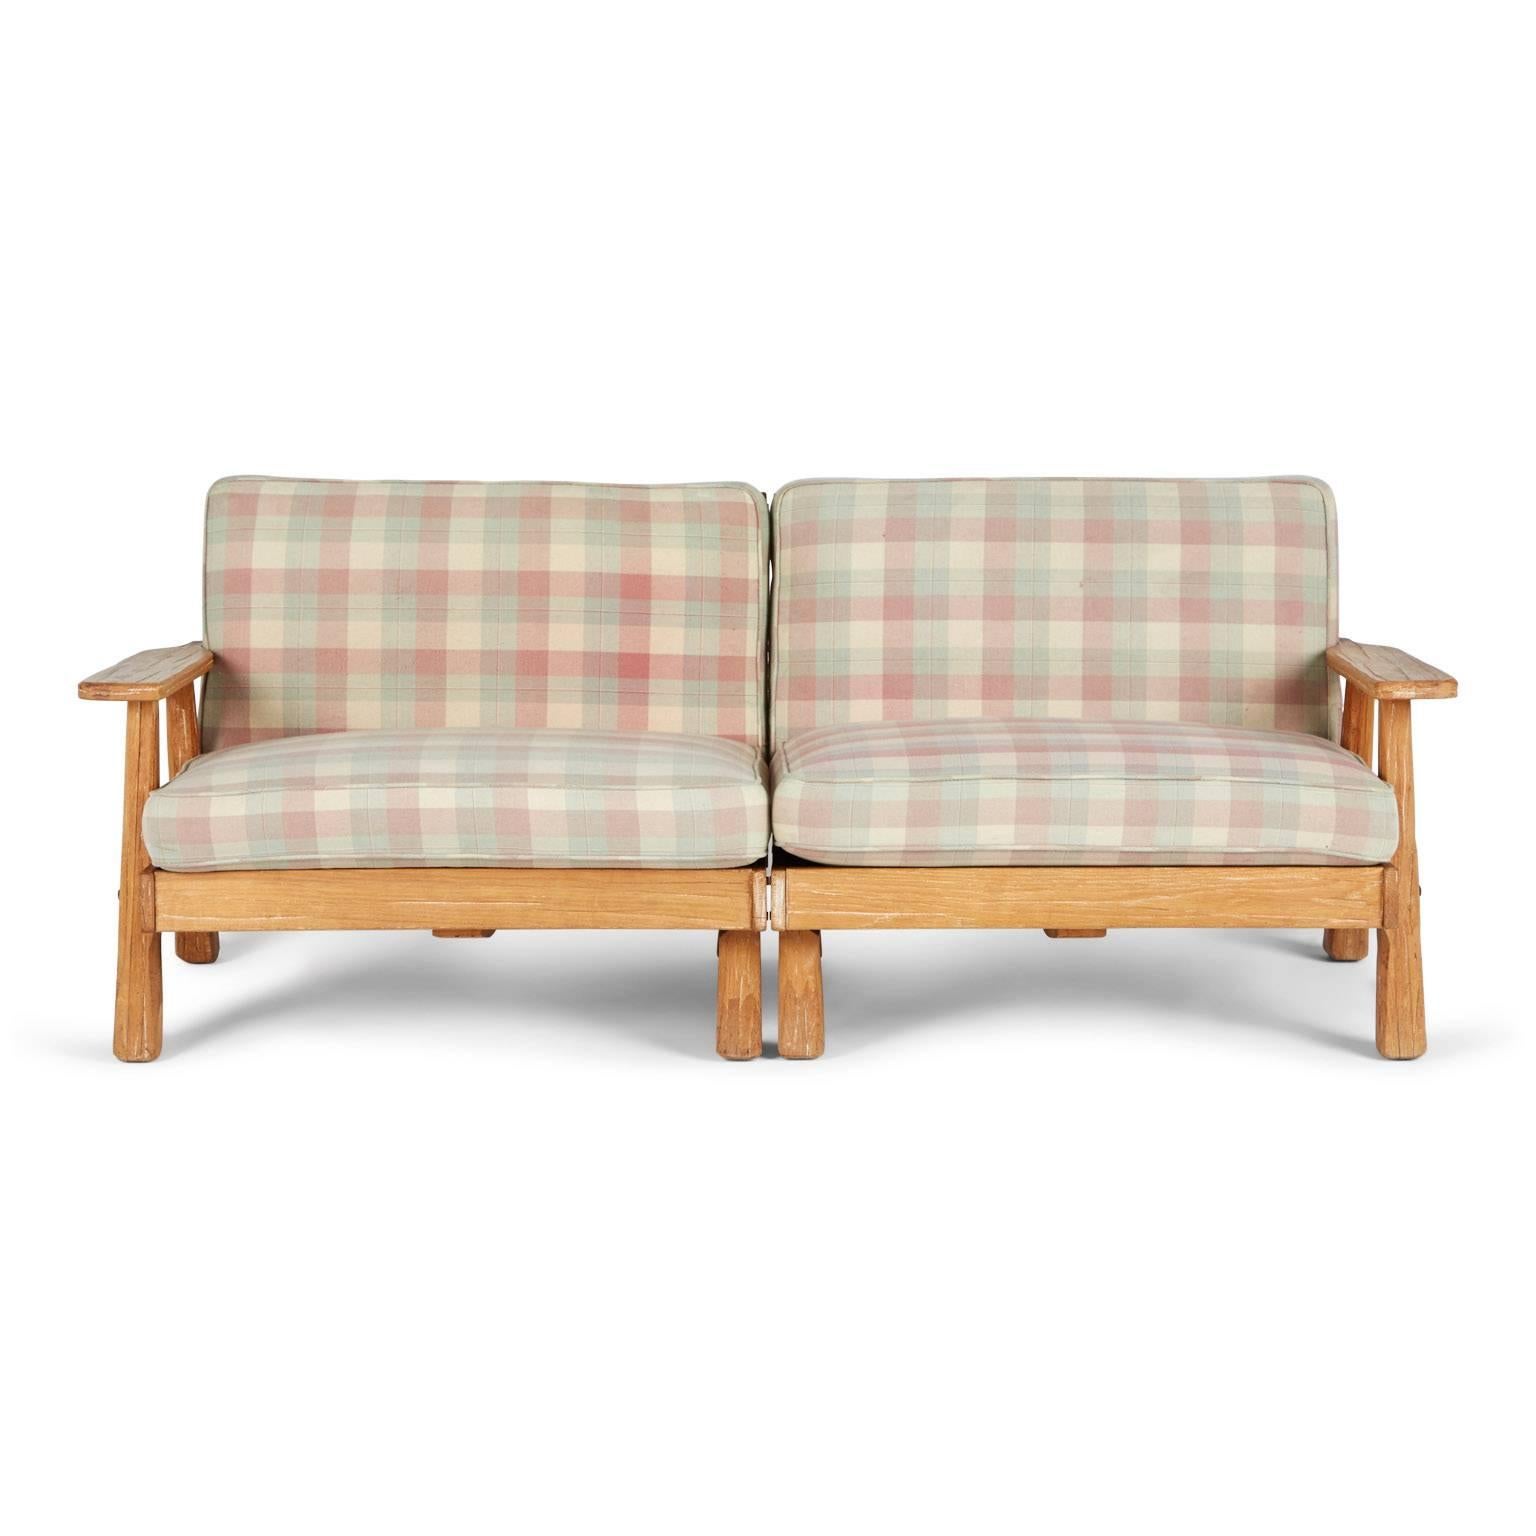 Rustic, simplistic, solidly constructed seating set from manufacturer A. Brandt Company, Inc. who were based in Fort Worth, Texas. The company debuted the Ranch Oak furniture line in Fort Worth in 1938 and continued manufacturing this collection